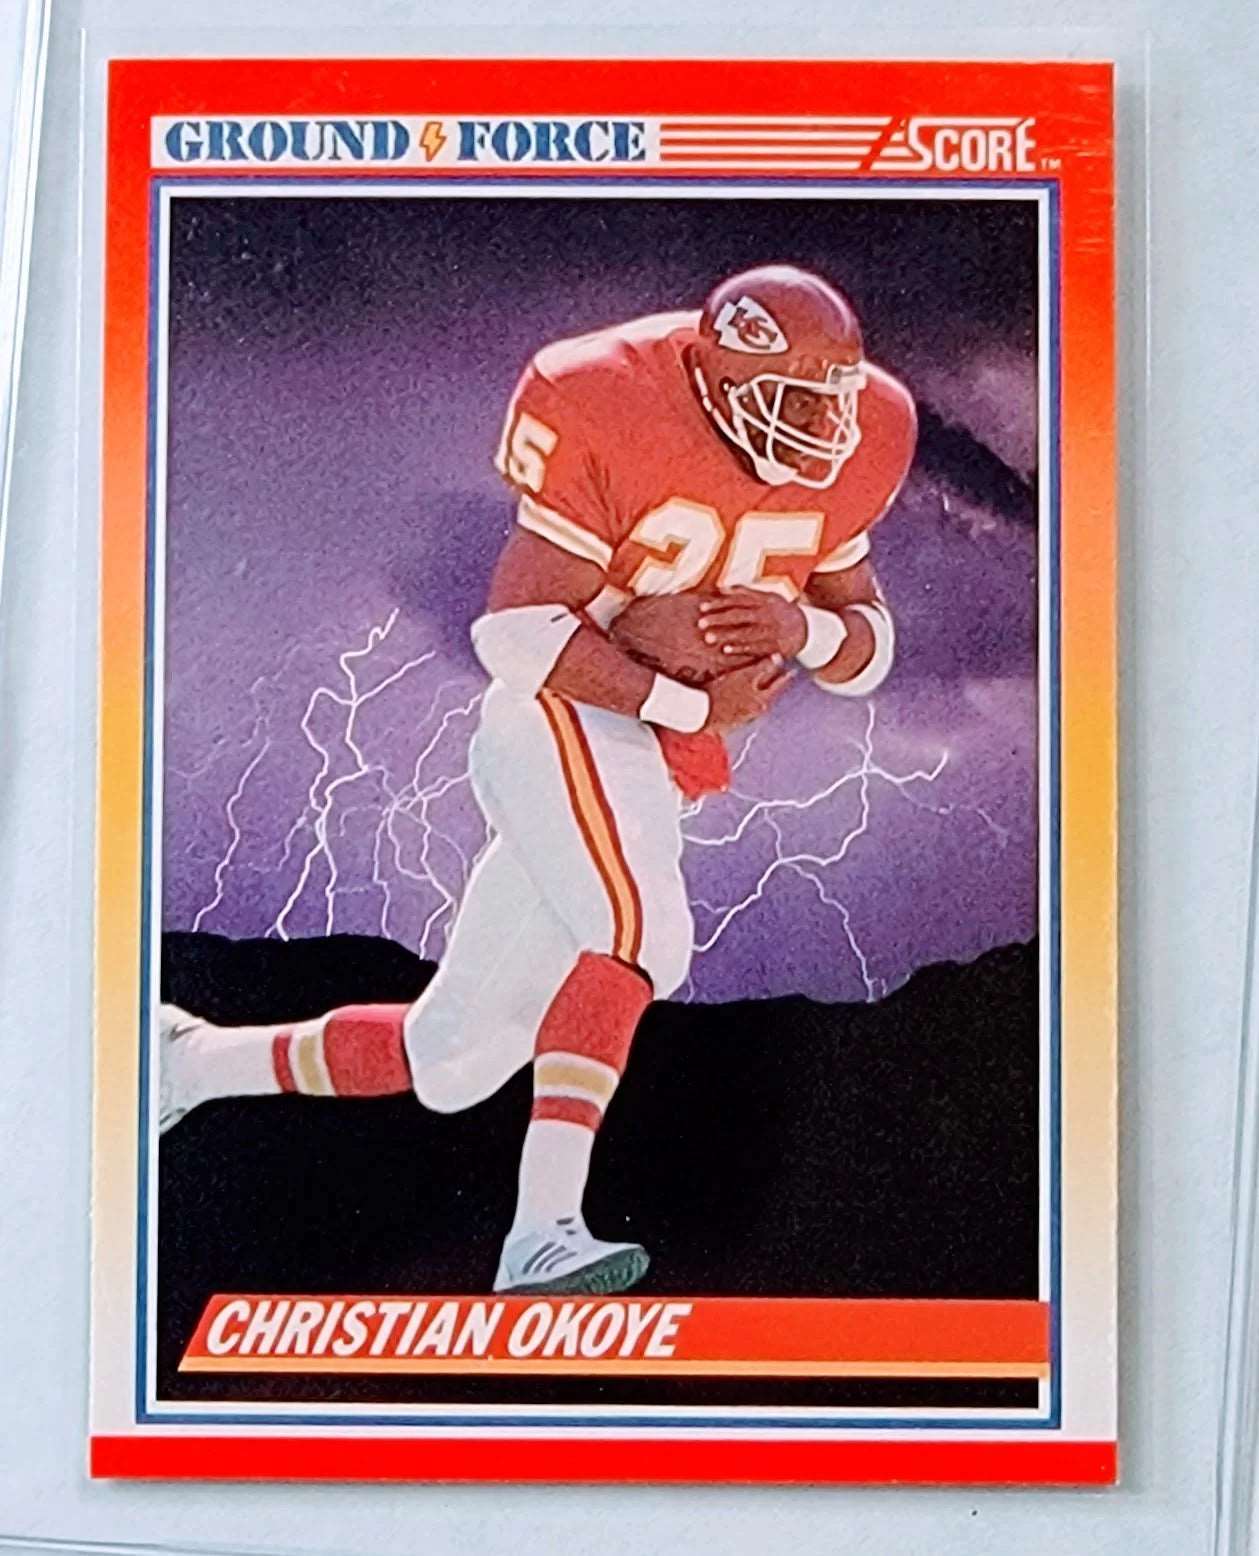 1990 Score Christian Okoye Ground Force Insert Football Card AVM1 simple Xclusive Collectibles   